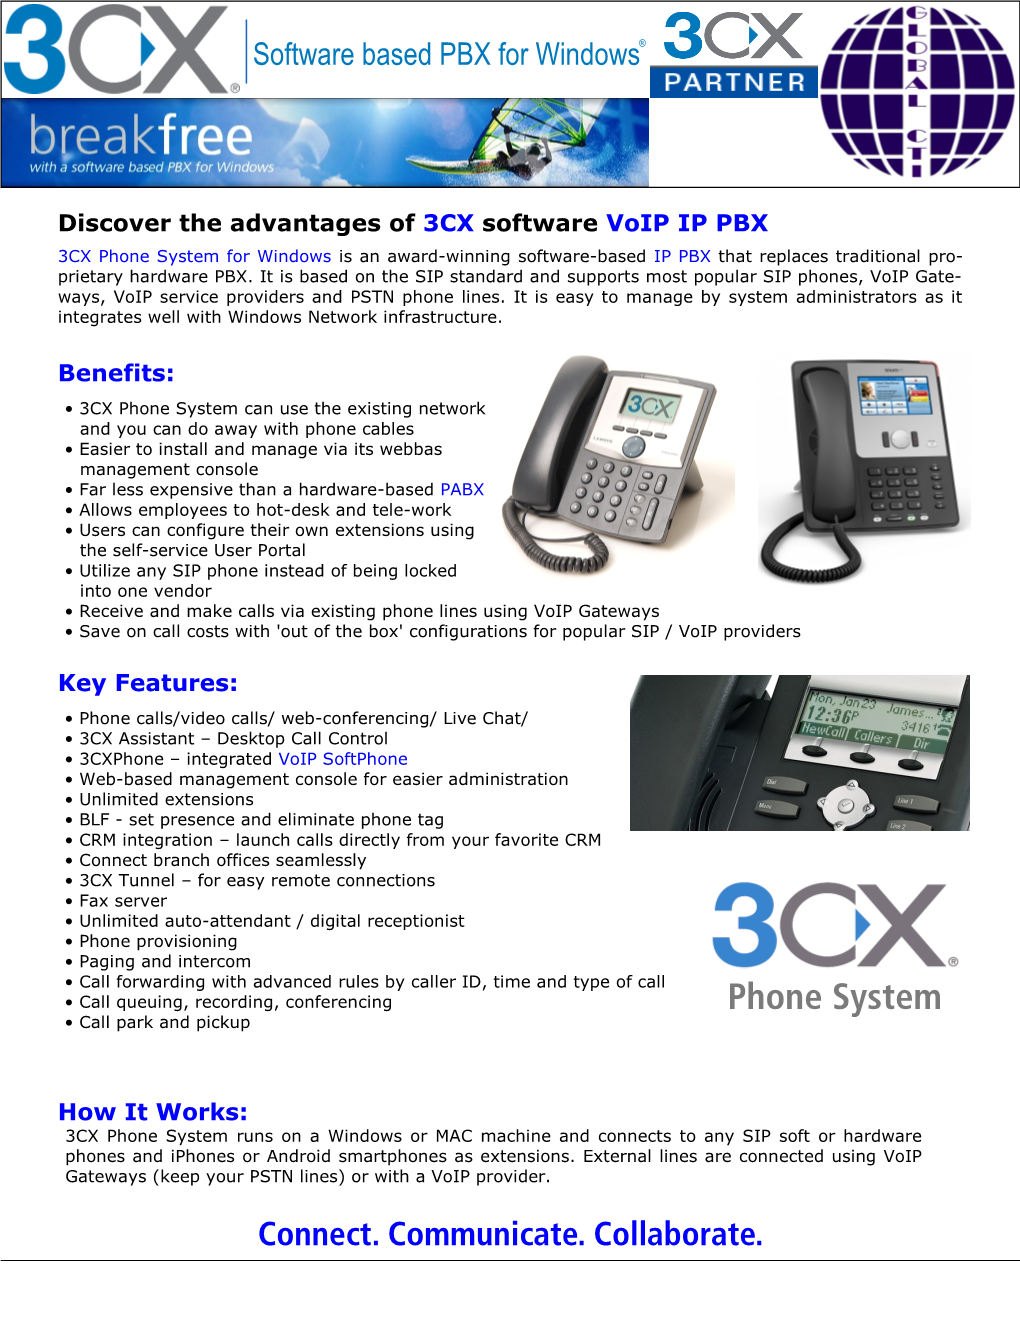 Phone System for Windows Is an Award-Winning Software-Based IP PBX That Replaces Traditional Pro- Prietary Hardware PBX